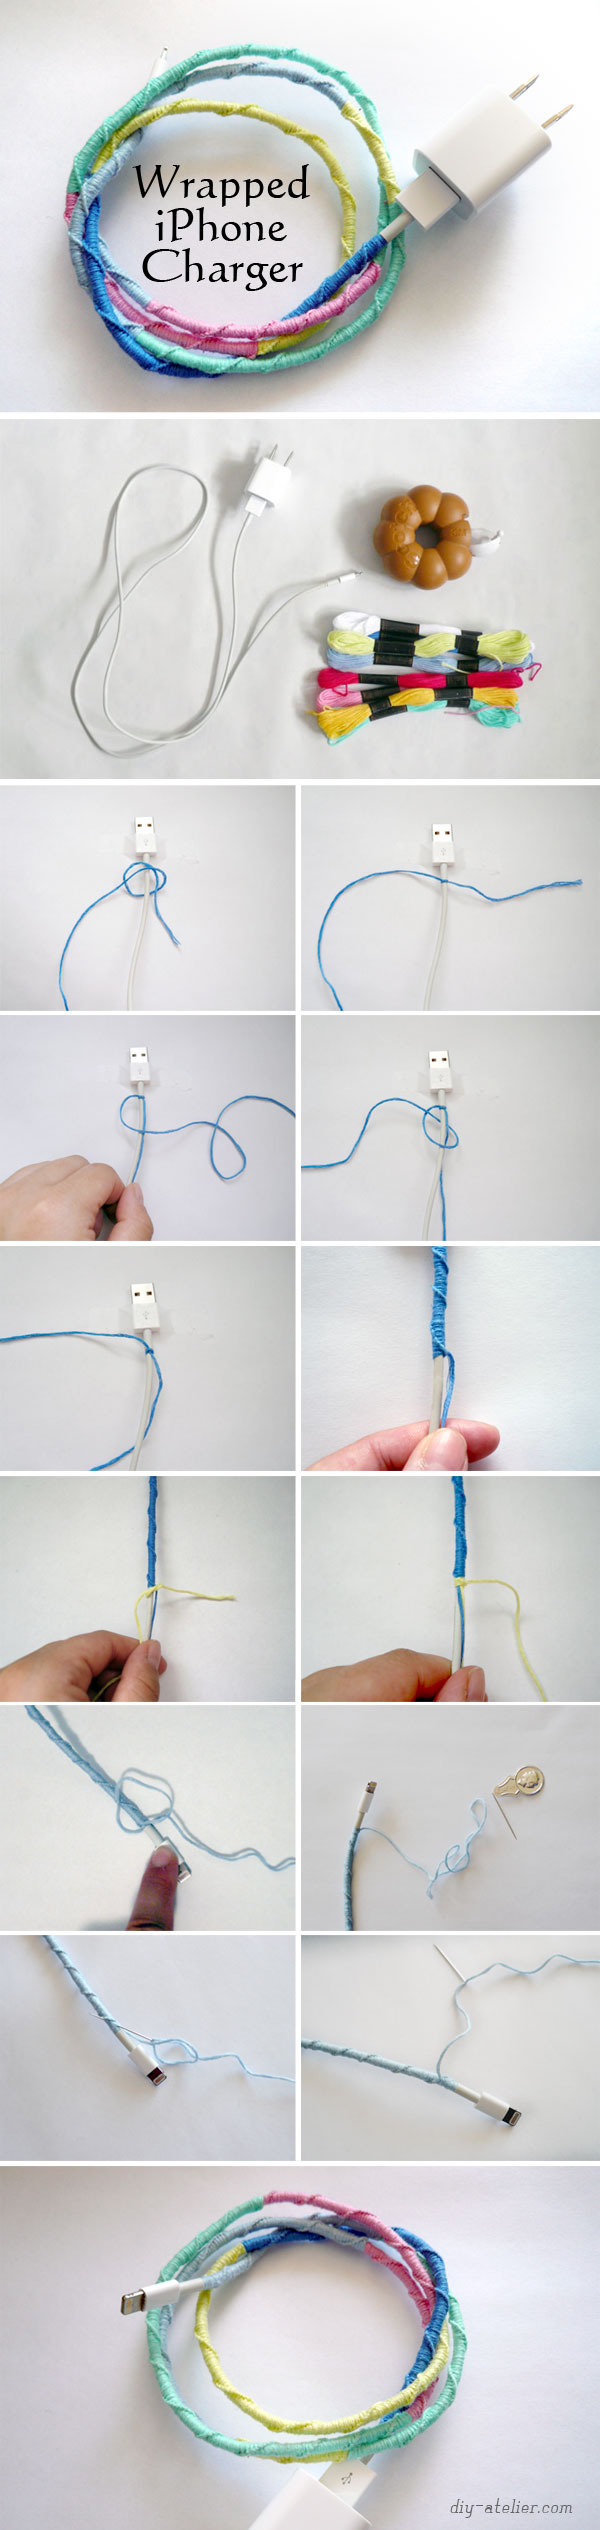 wrapped_iphone_charger00